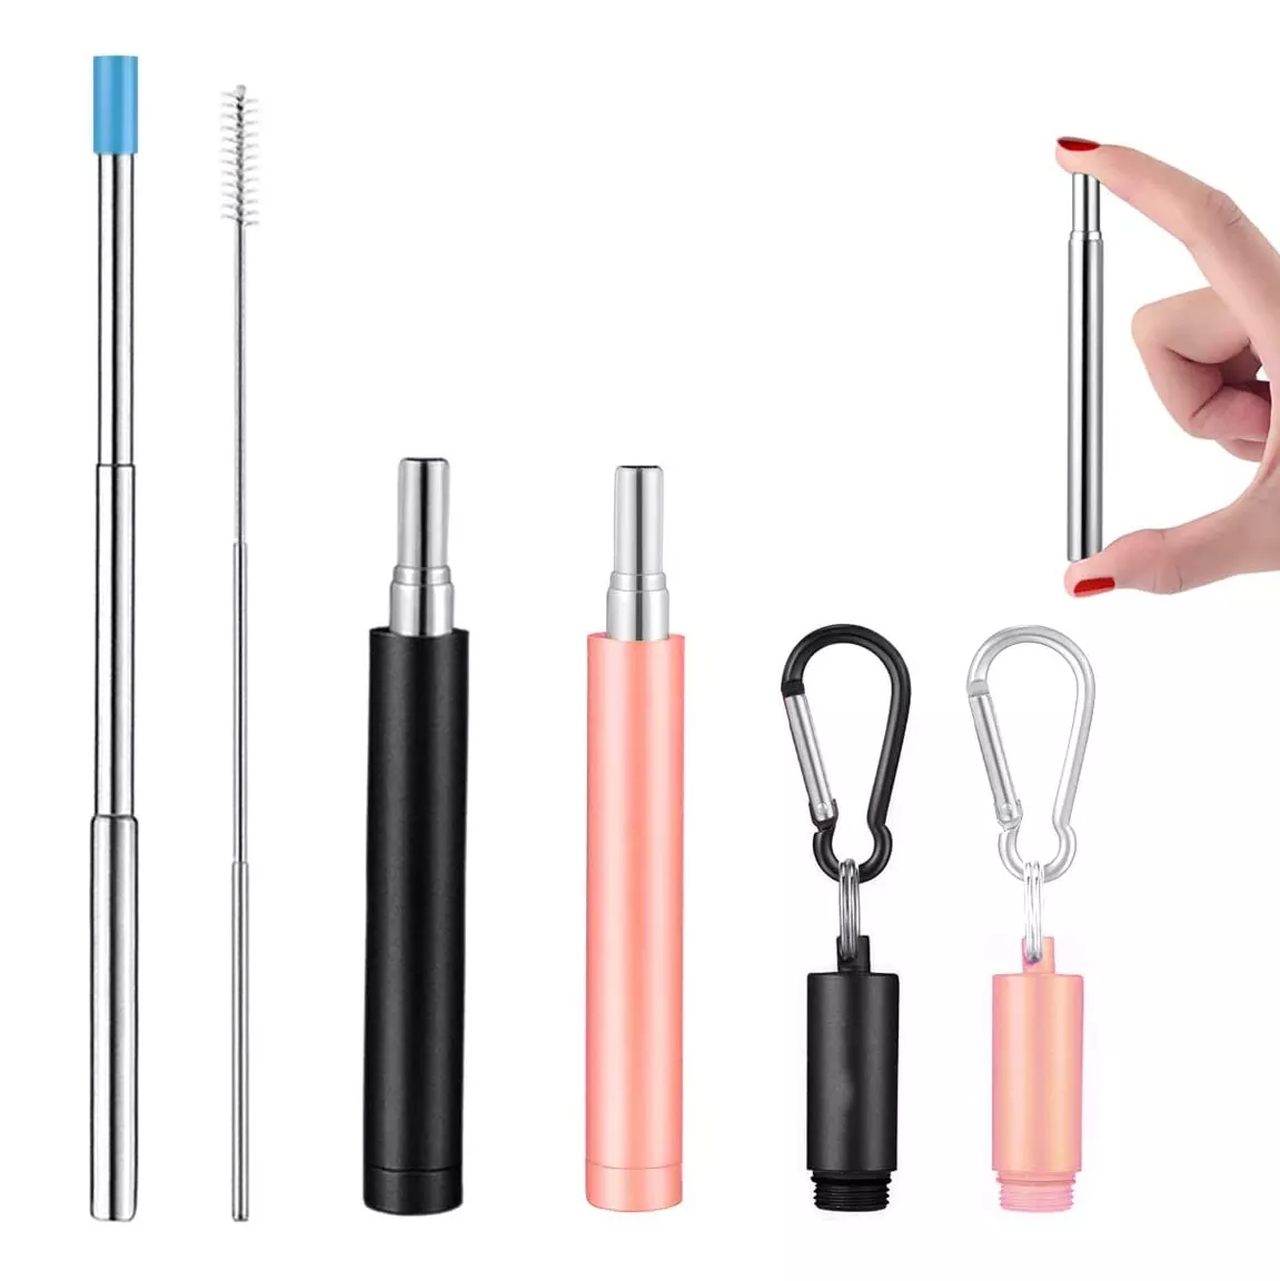 Dia 0.32 inch Reusable Metal Straws with Silicone Travel Case Cleaning Brush Long Stainless Steel Straws Bent Drinking Straw for 20 and 30 oz Tumbler silver 